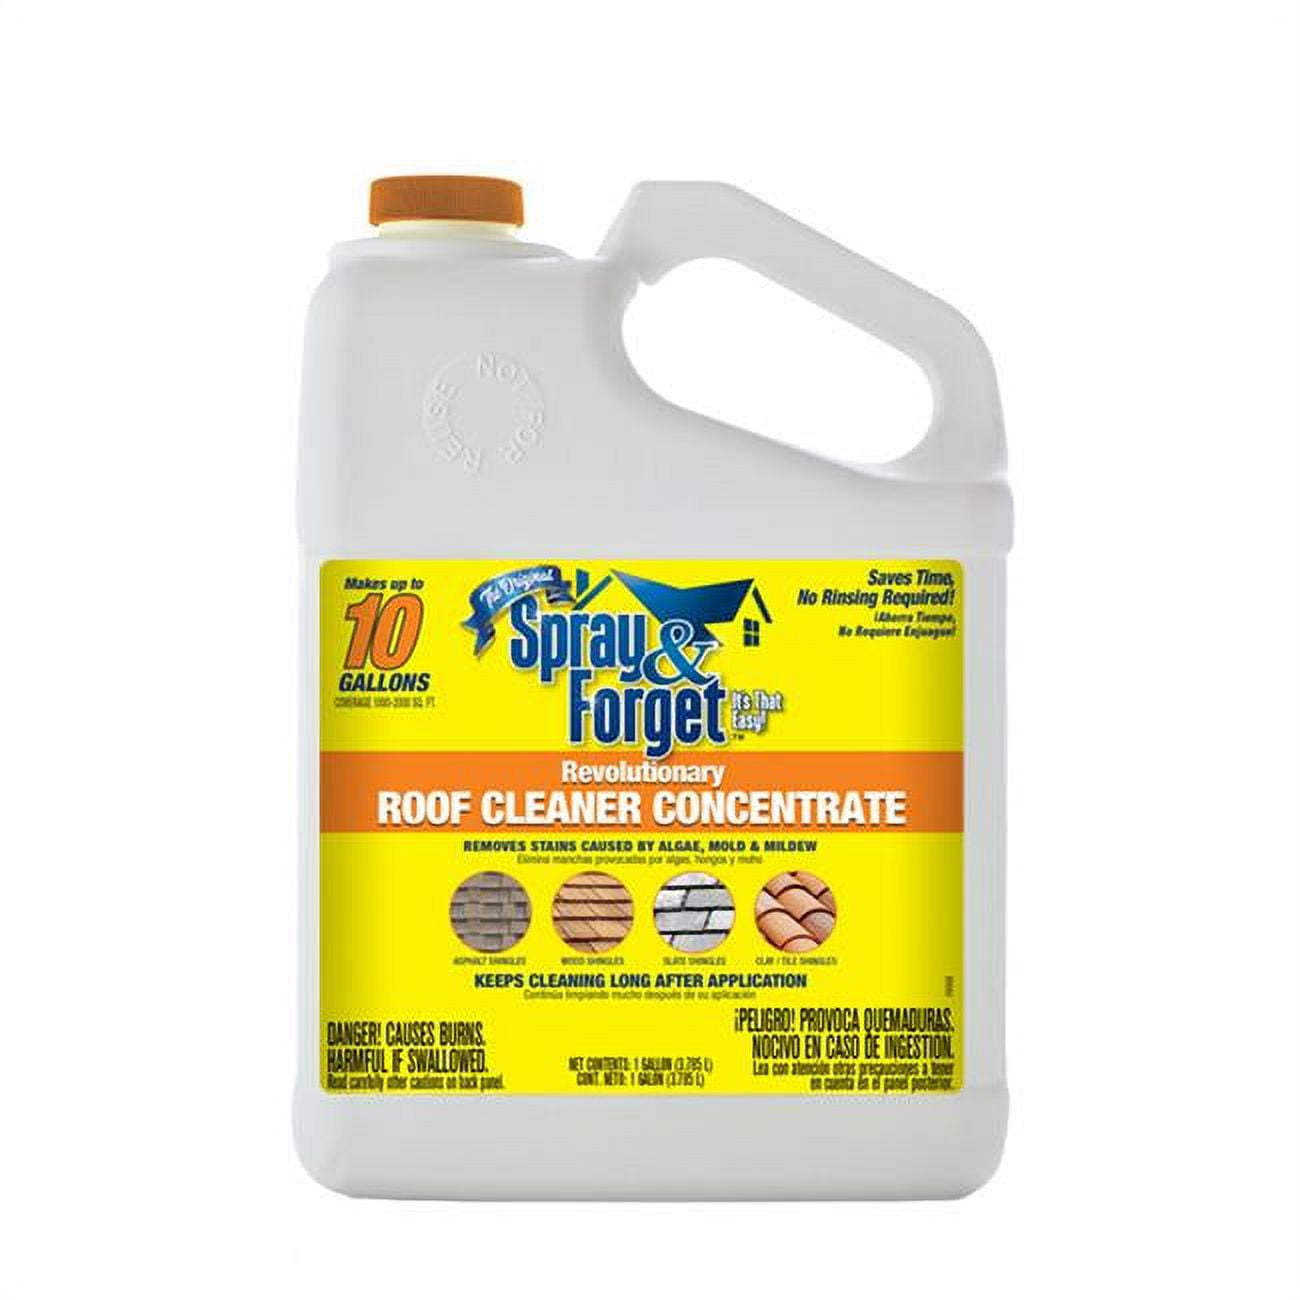 7002830 1 gal Roof Cleaner Liquid - Pack of 4 -  SPRAY & FORGET